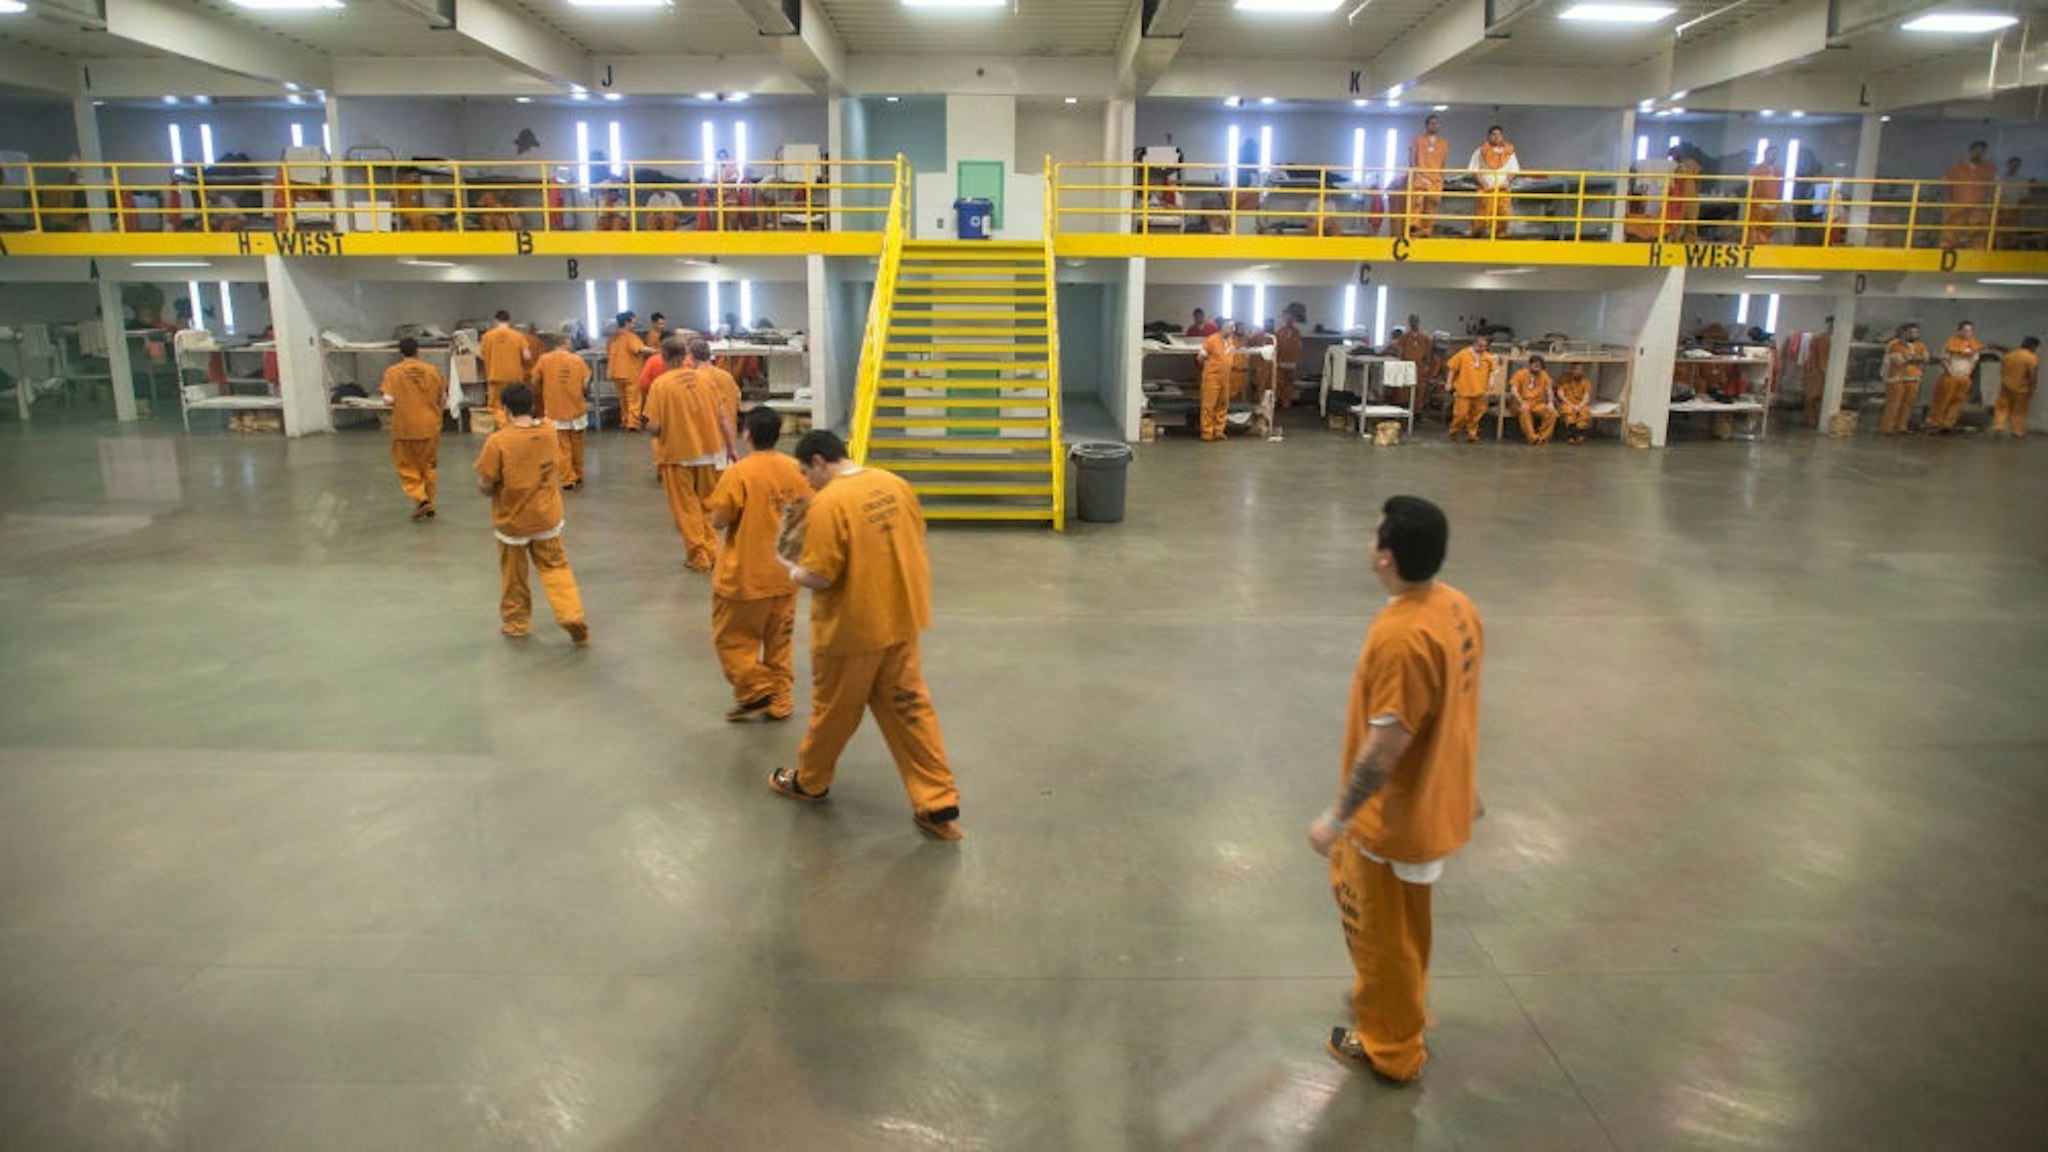 ORANGE, CA - MARCH 14: Detainees in a barrack holding area at the Theo Lacy Facility in Orange, California, on Tuesday, March 14, 2017. The Orange County sheriff conducted a media tour of the jail that included the intake area, the kitchen, an isolation unit and a modular holding area. (Photo by Jeff Gritchen/Digital First Media/Orange County Register via Getty Images)